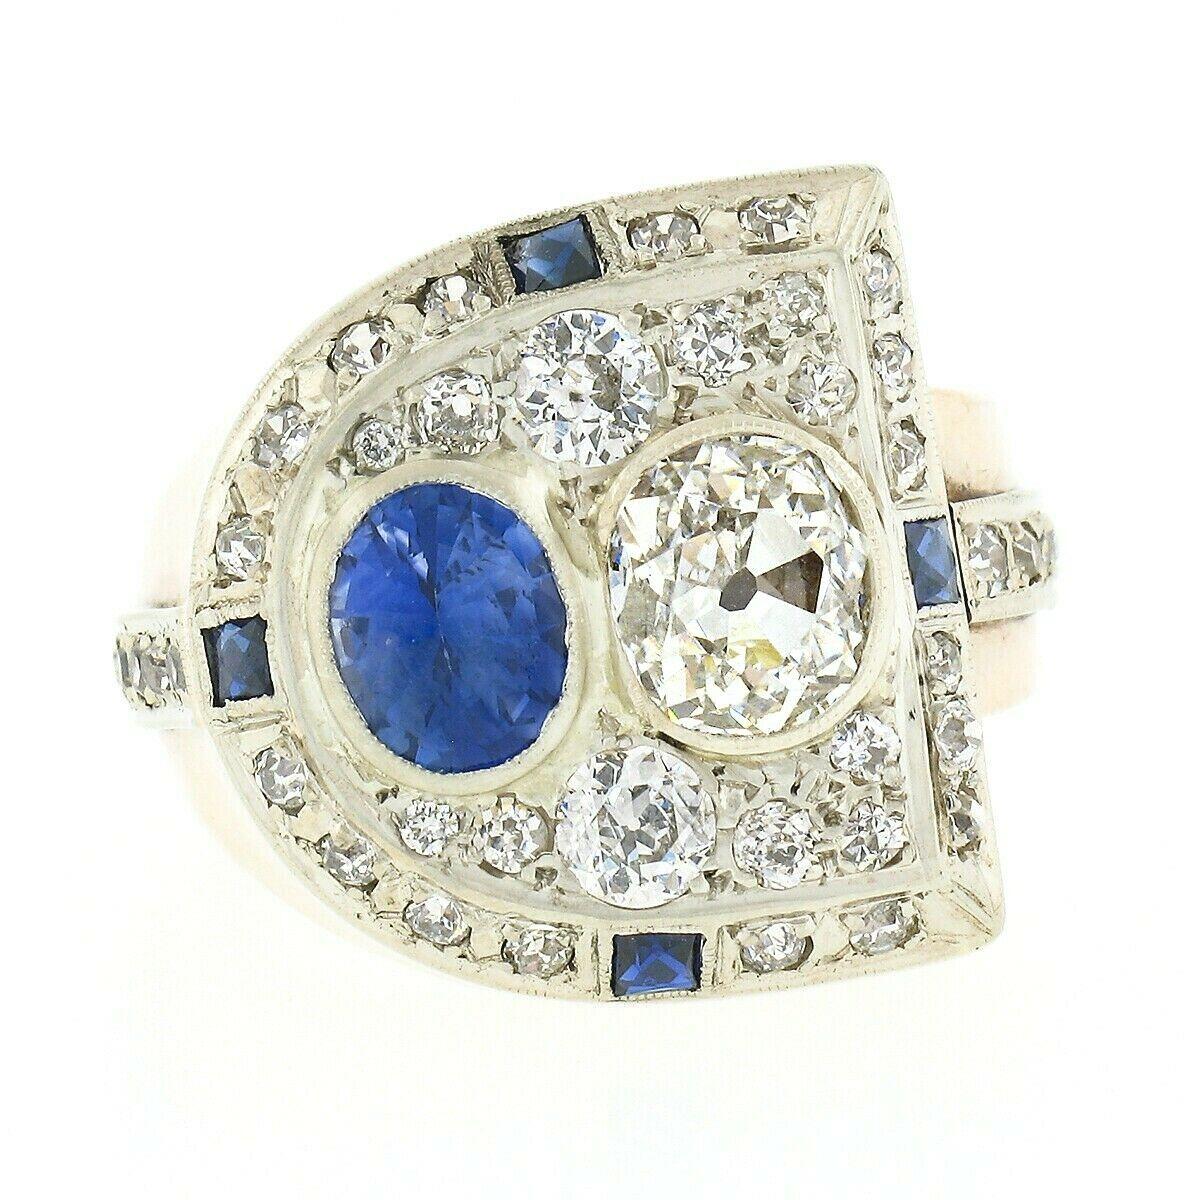 Antique Retro 14K Gold 3.65ct Bezel GIA Cushion Diamond & Sapphire Cocktail Ring In Good Condition For Sale In Montclair, NJ